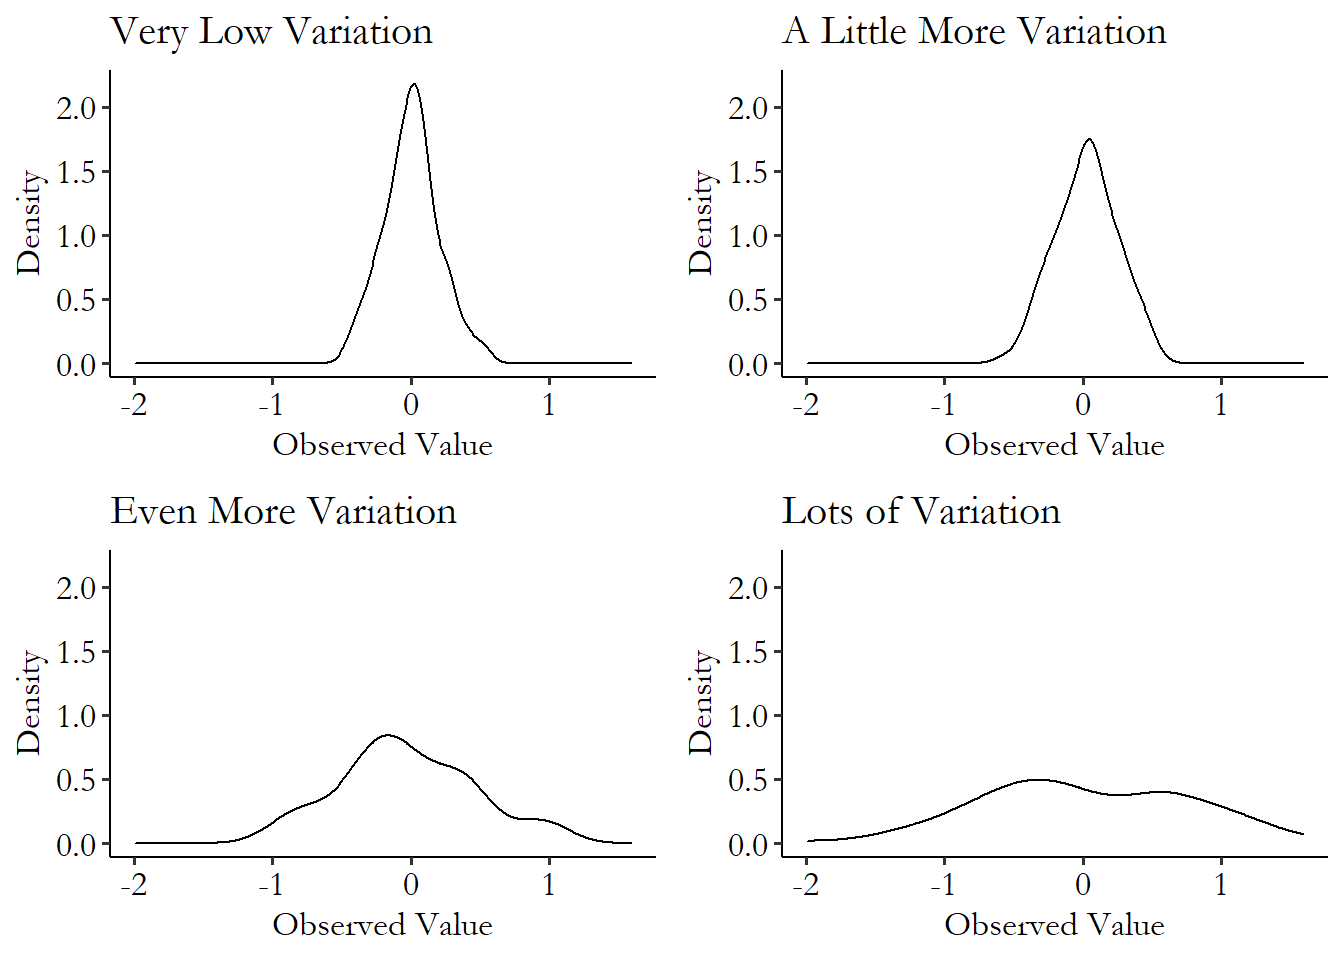 Four density plots of simulated data with increasingly larger variances, showing density plots that are increasingly flatter and more spread out